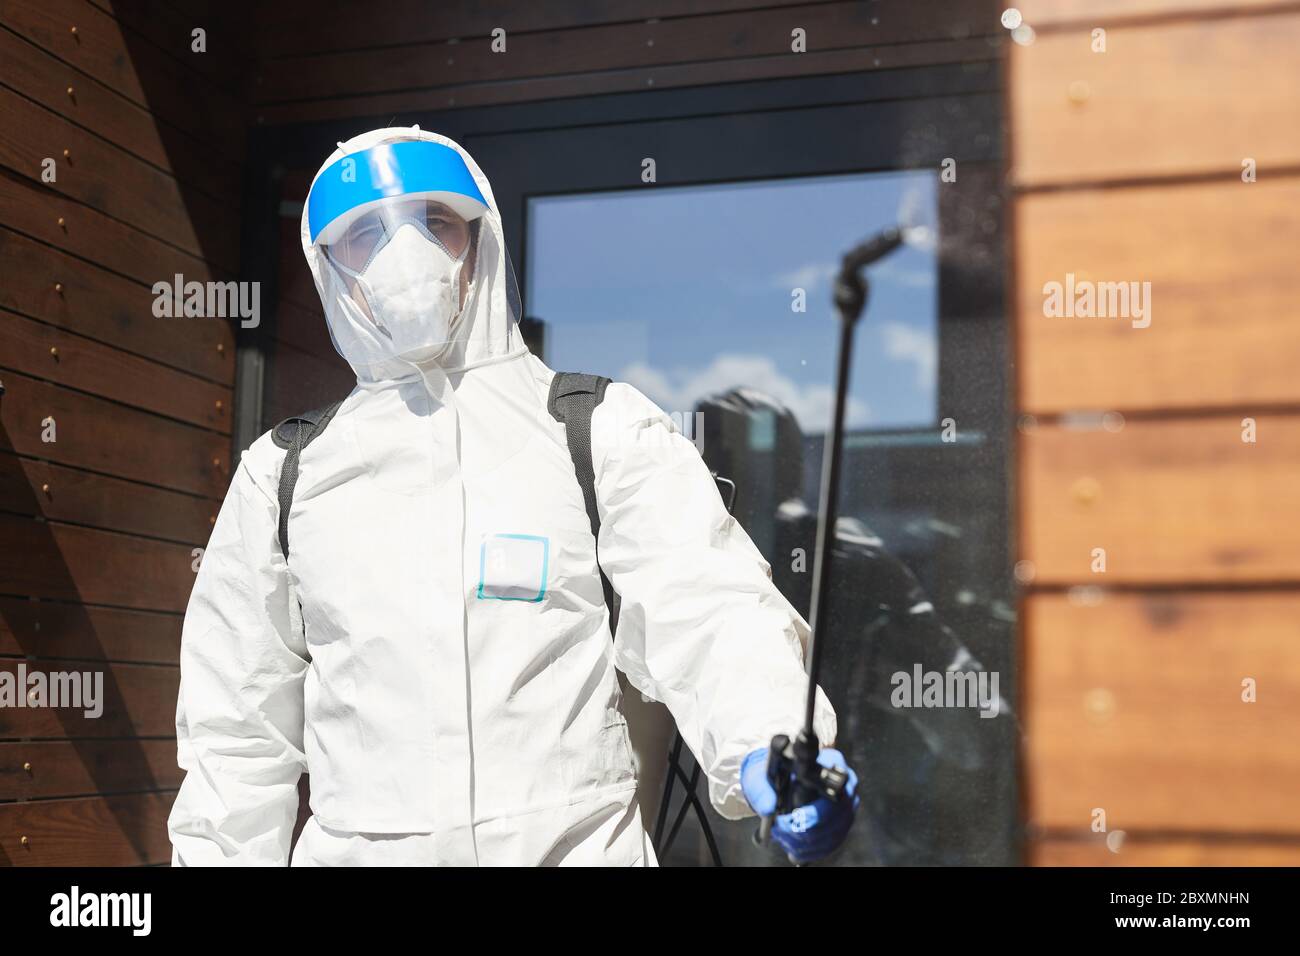 Waist up portrait of male worker wearing protective gear spraying chemicals to camera outdoors during disinfection, copy space Stock Photo